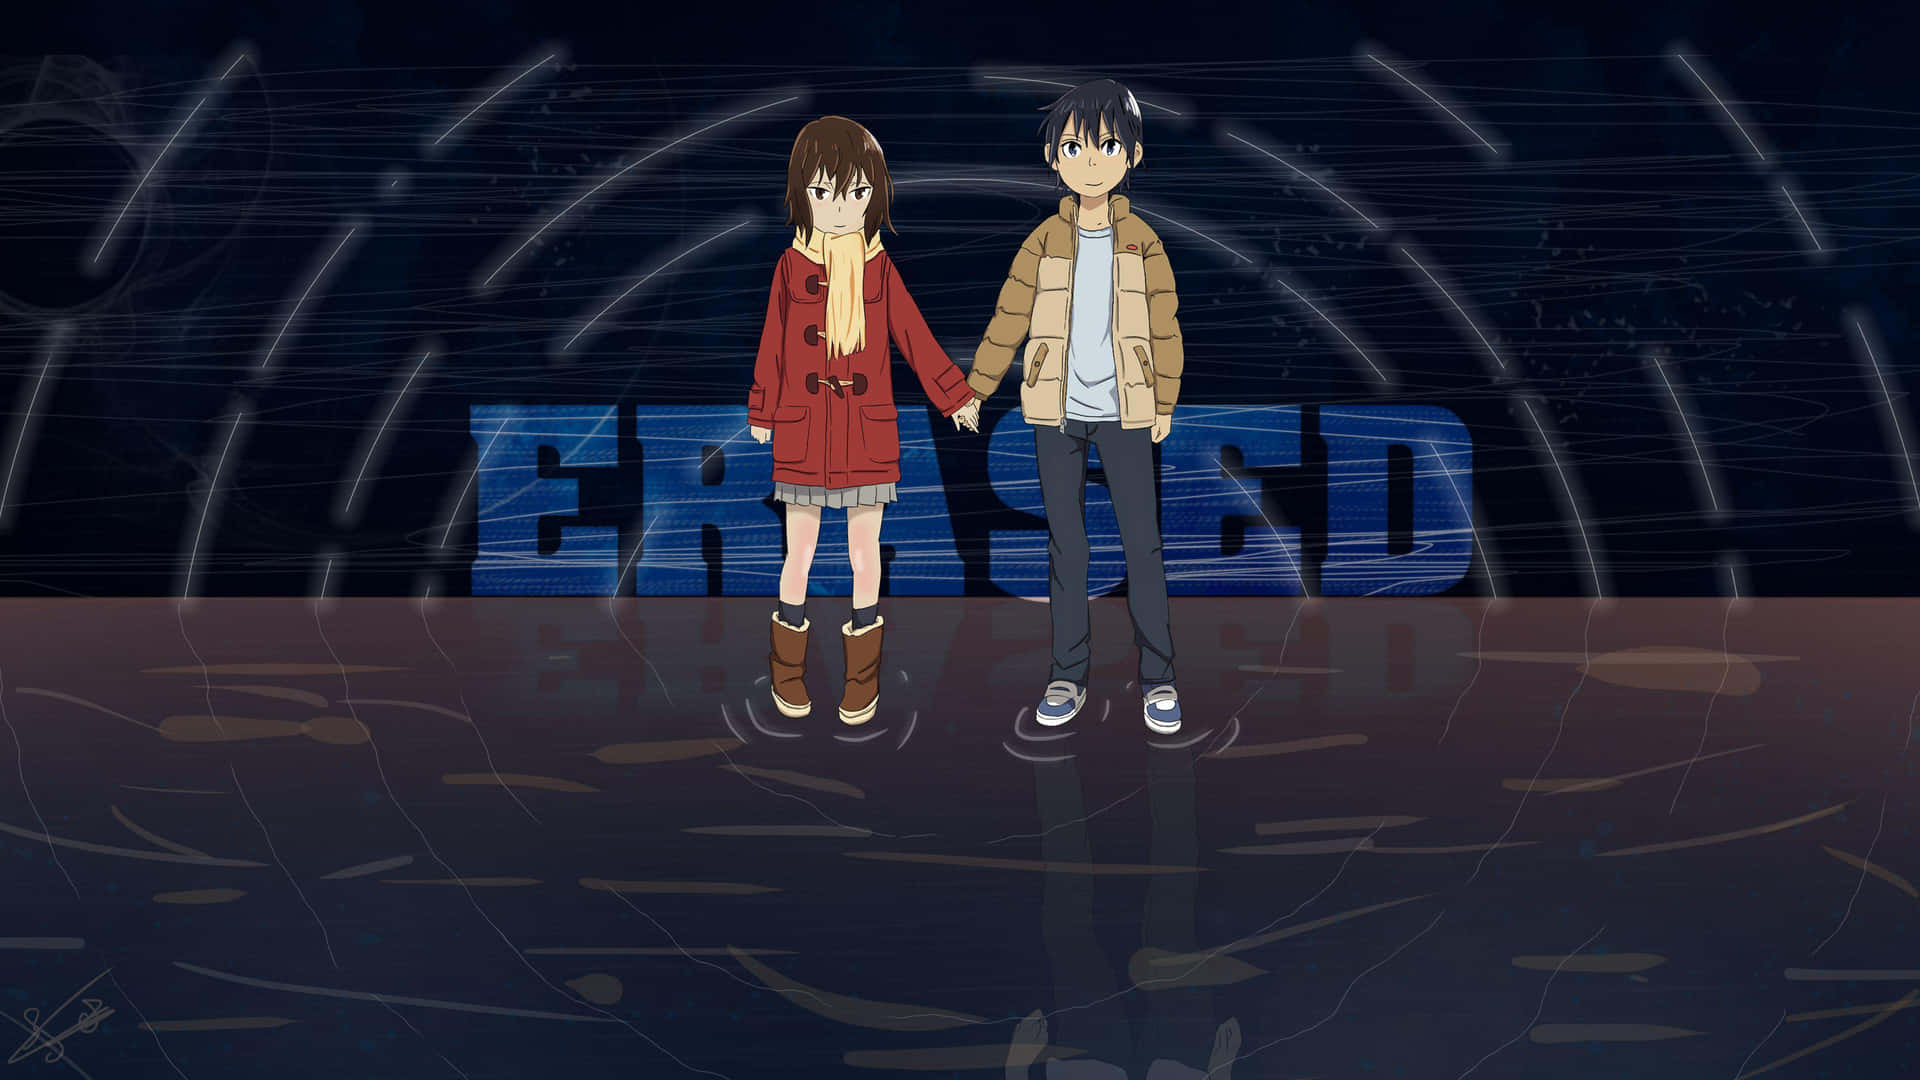 Explore Unanswered Mysteries in Erased